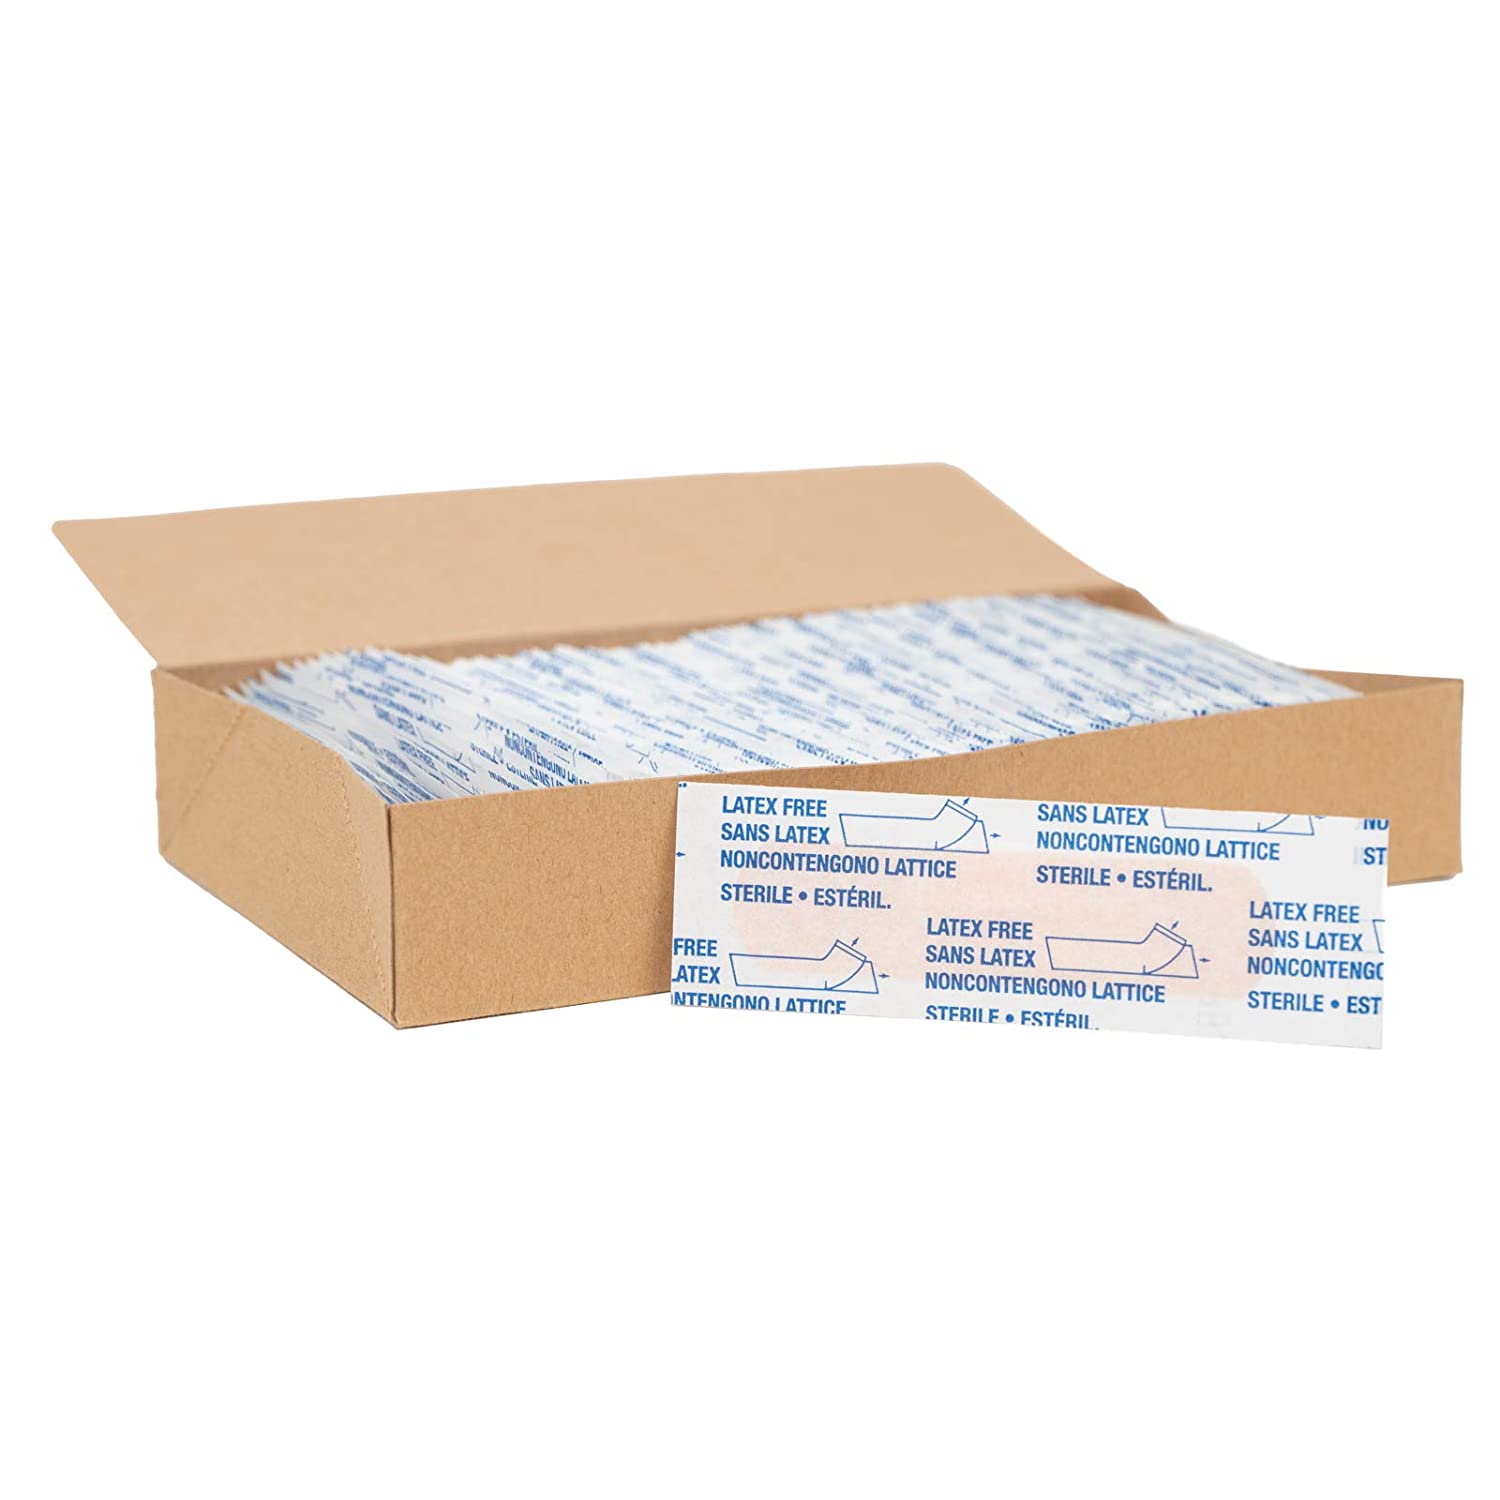 American White Cross Adhesive Bandages, Sheer Strips, 3/4" x 3", Case of 1500,28854